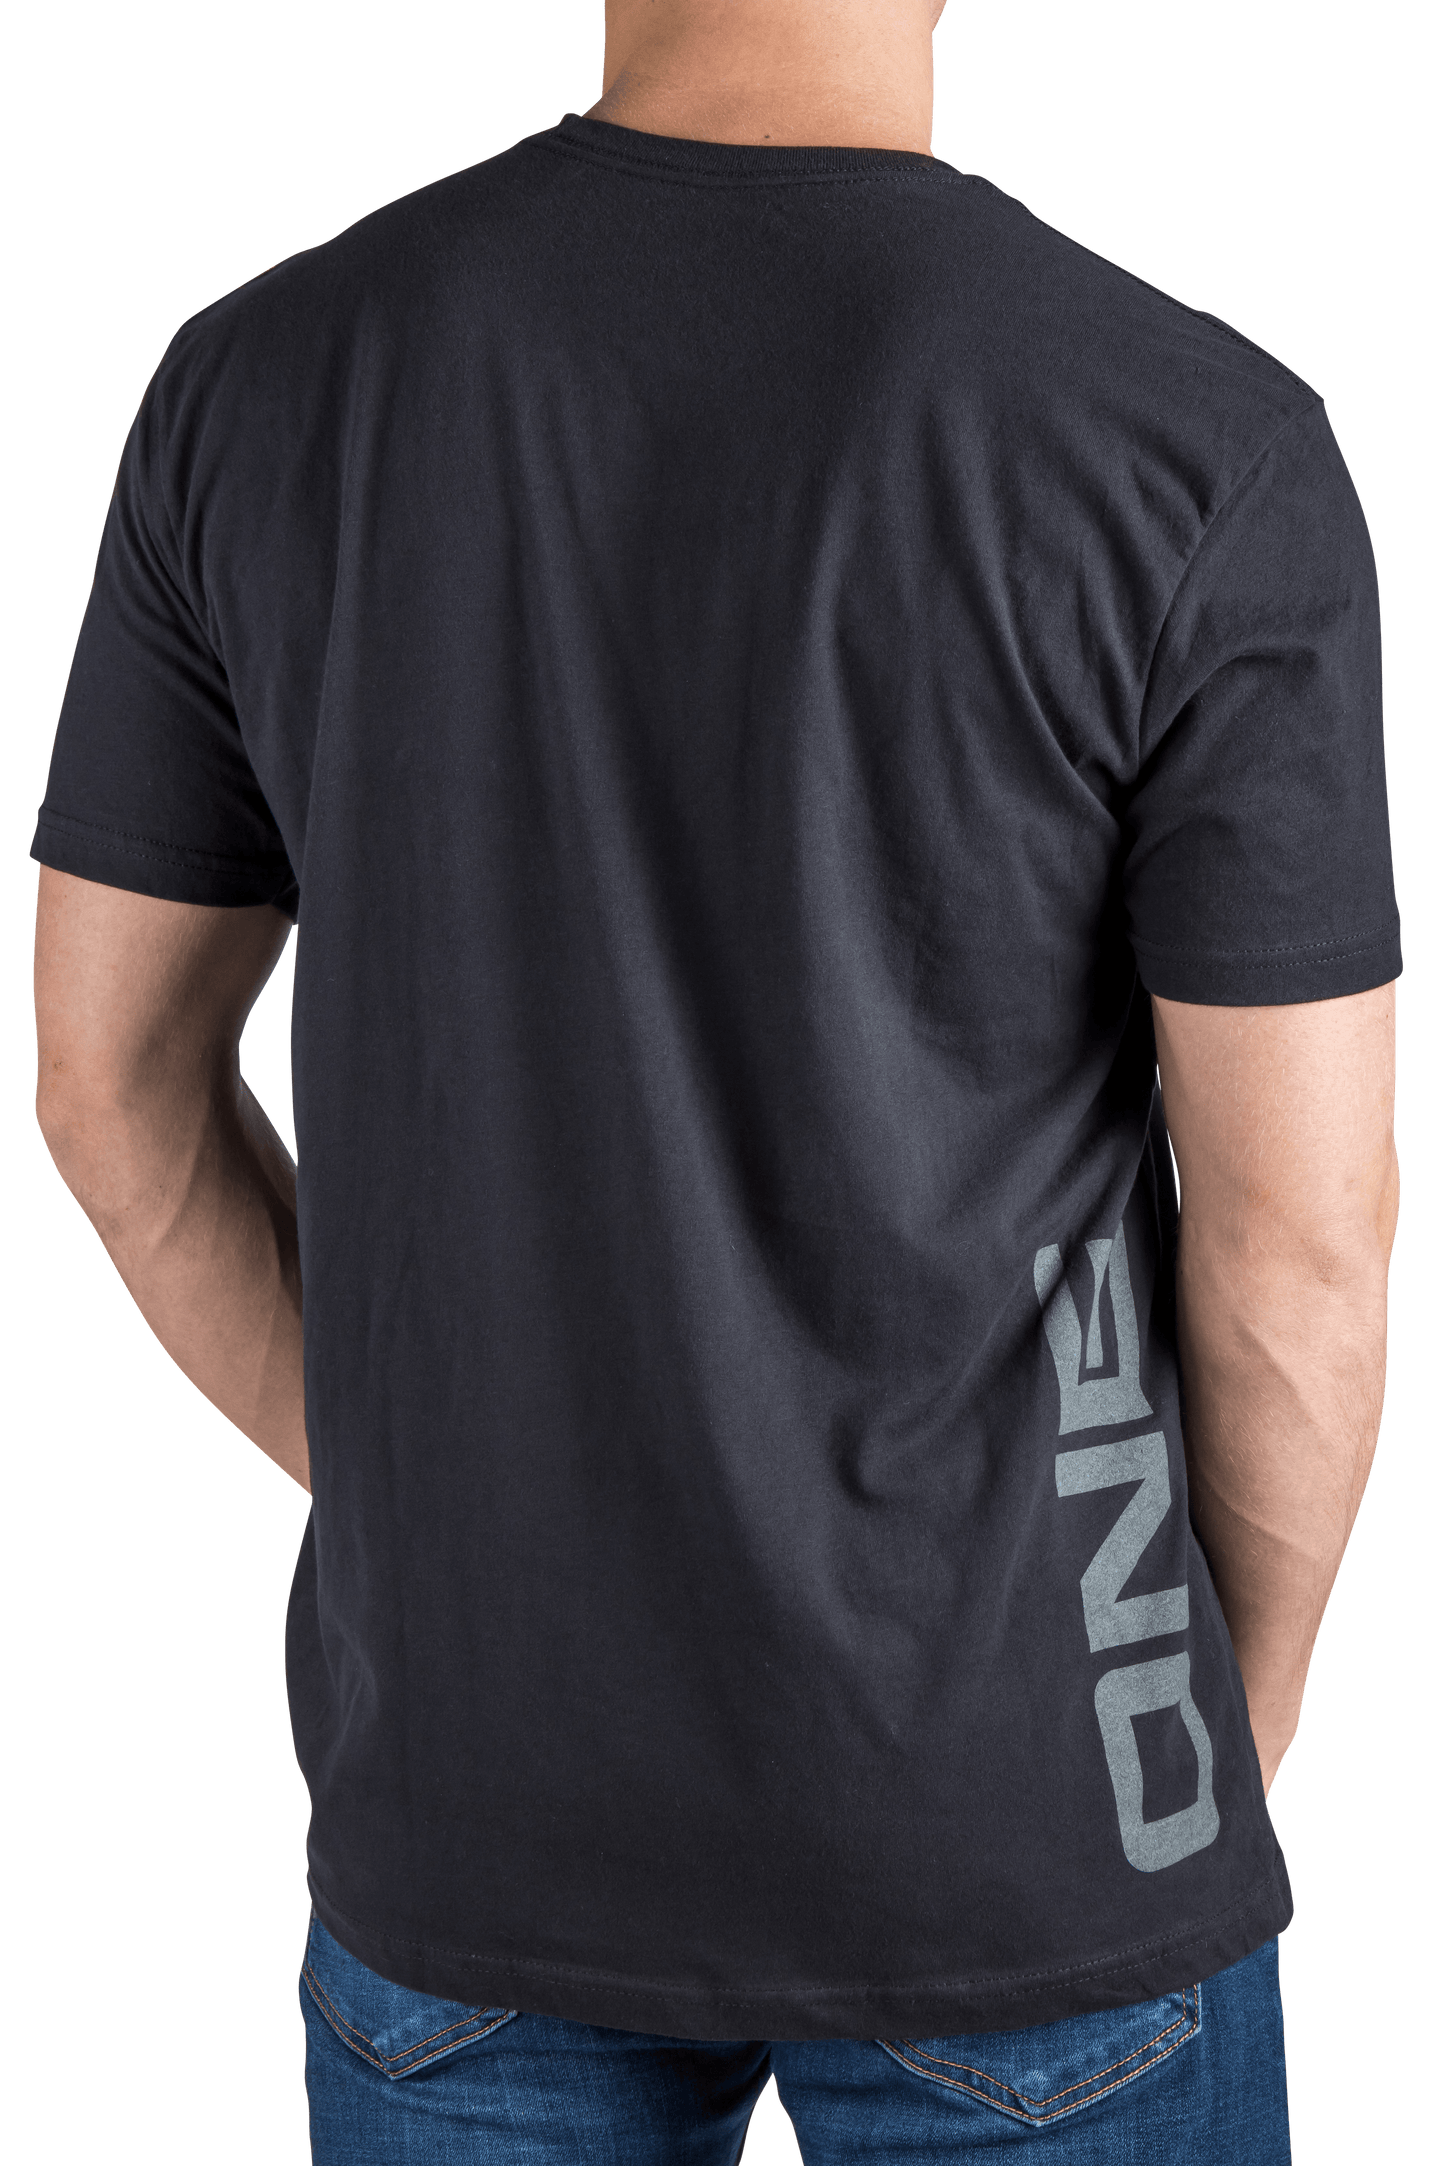 2023 Ronix One Tee Clothing - Mens - Tops - Tees Ronix 